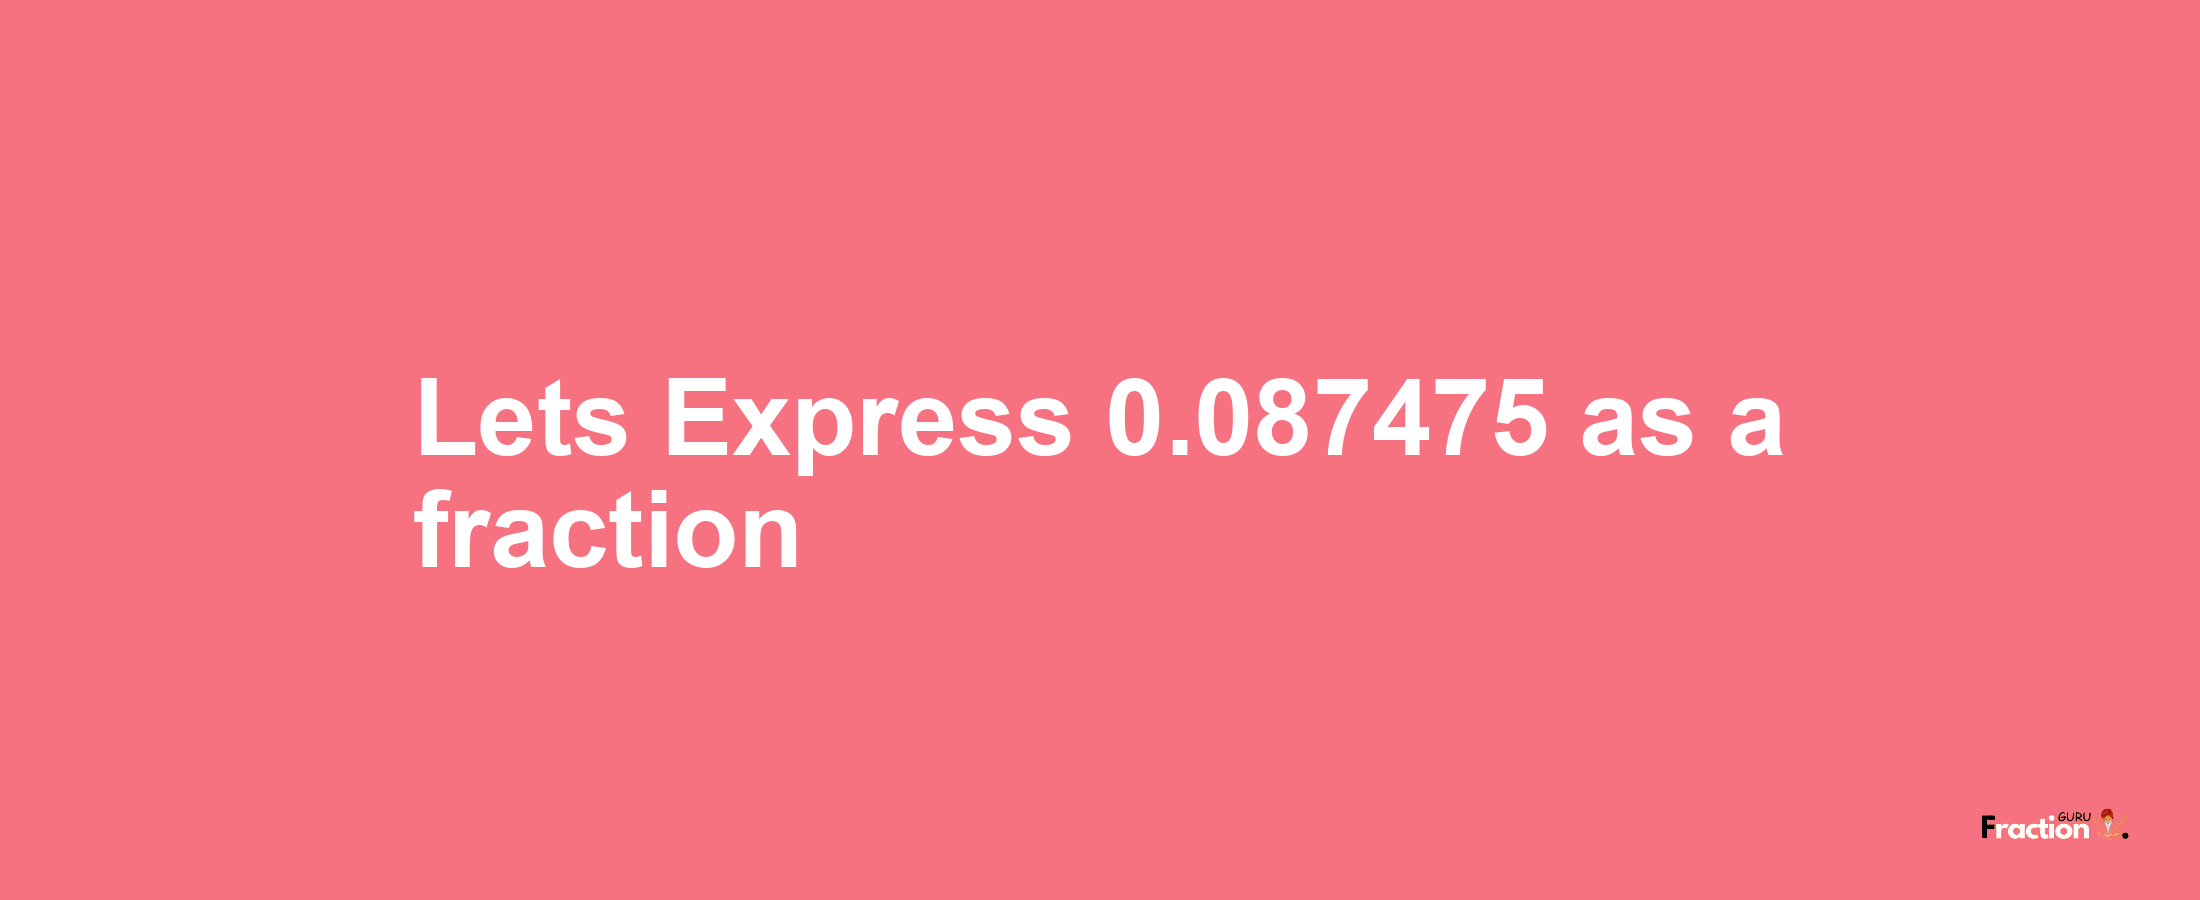 Lets Express 0.087475 as afraction